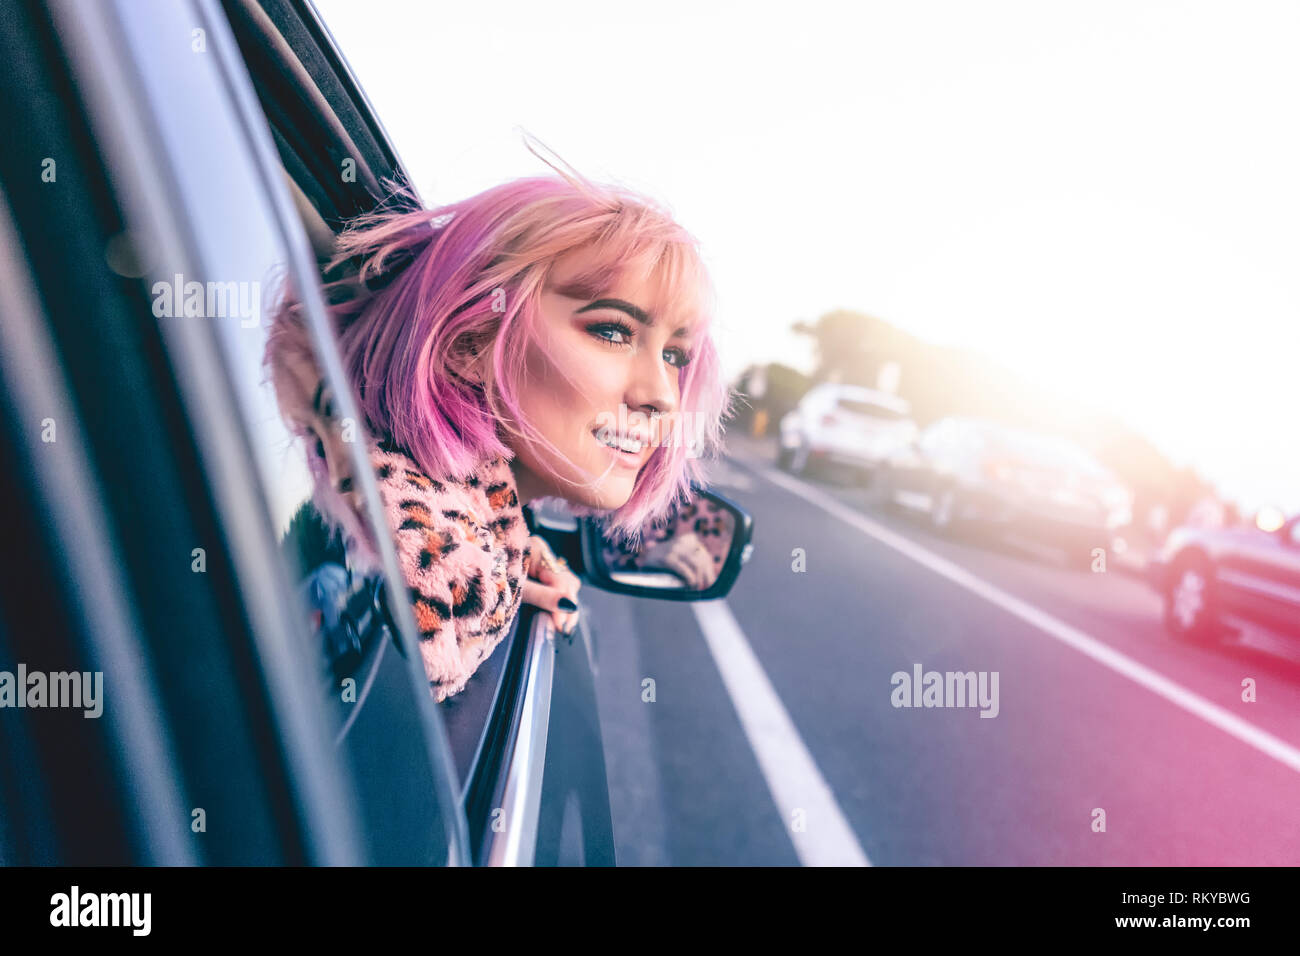 Teen girl with pink hair hangs her head out of a car window on roadtrip. Stock Photo